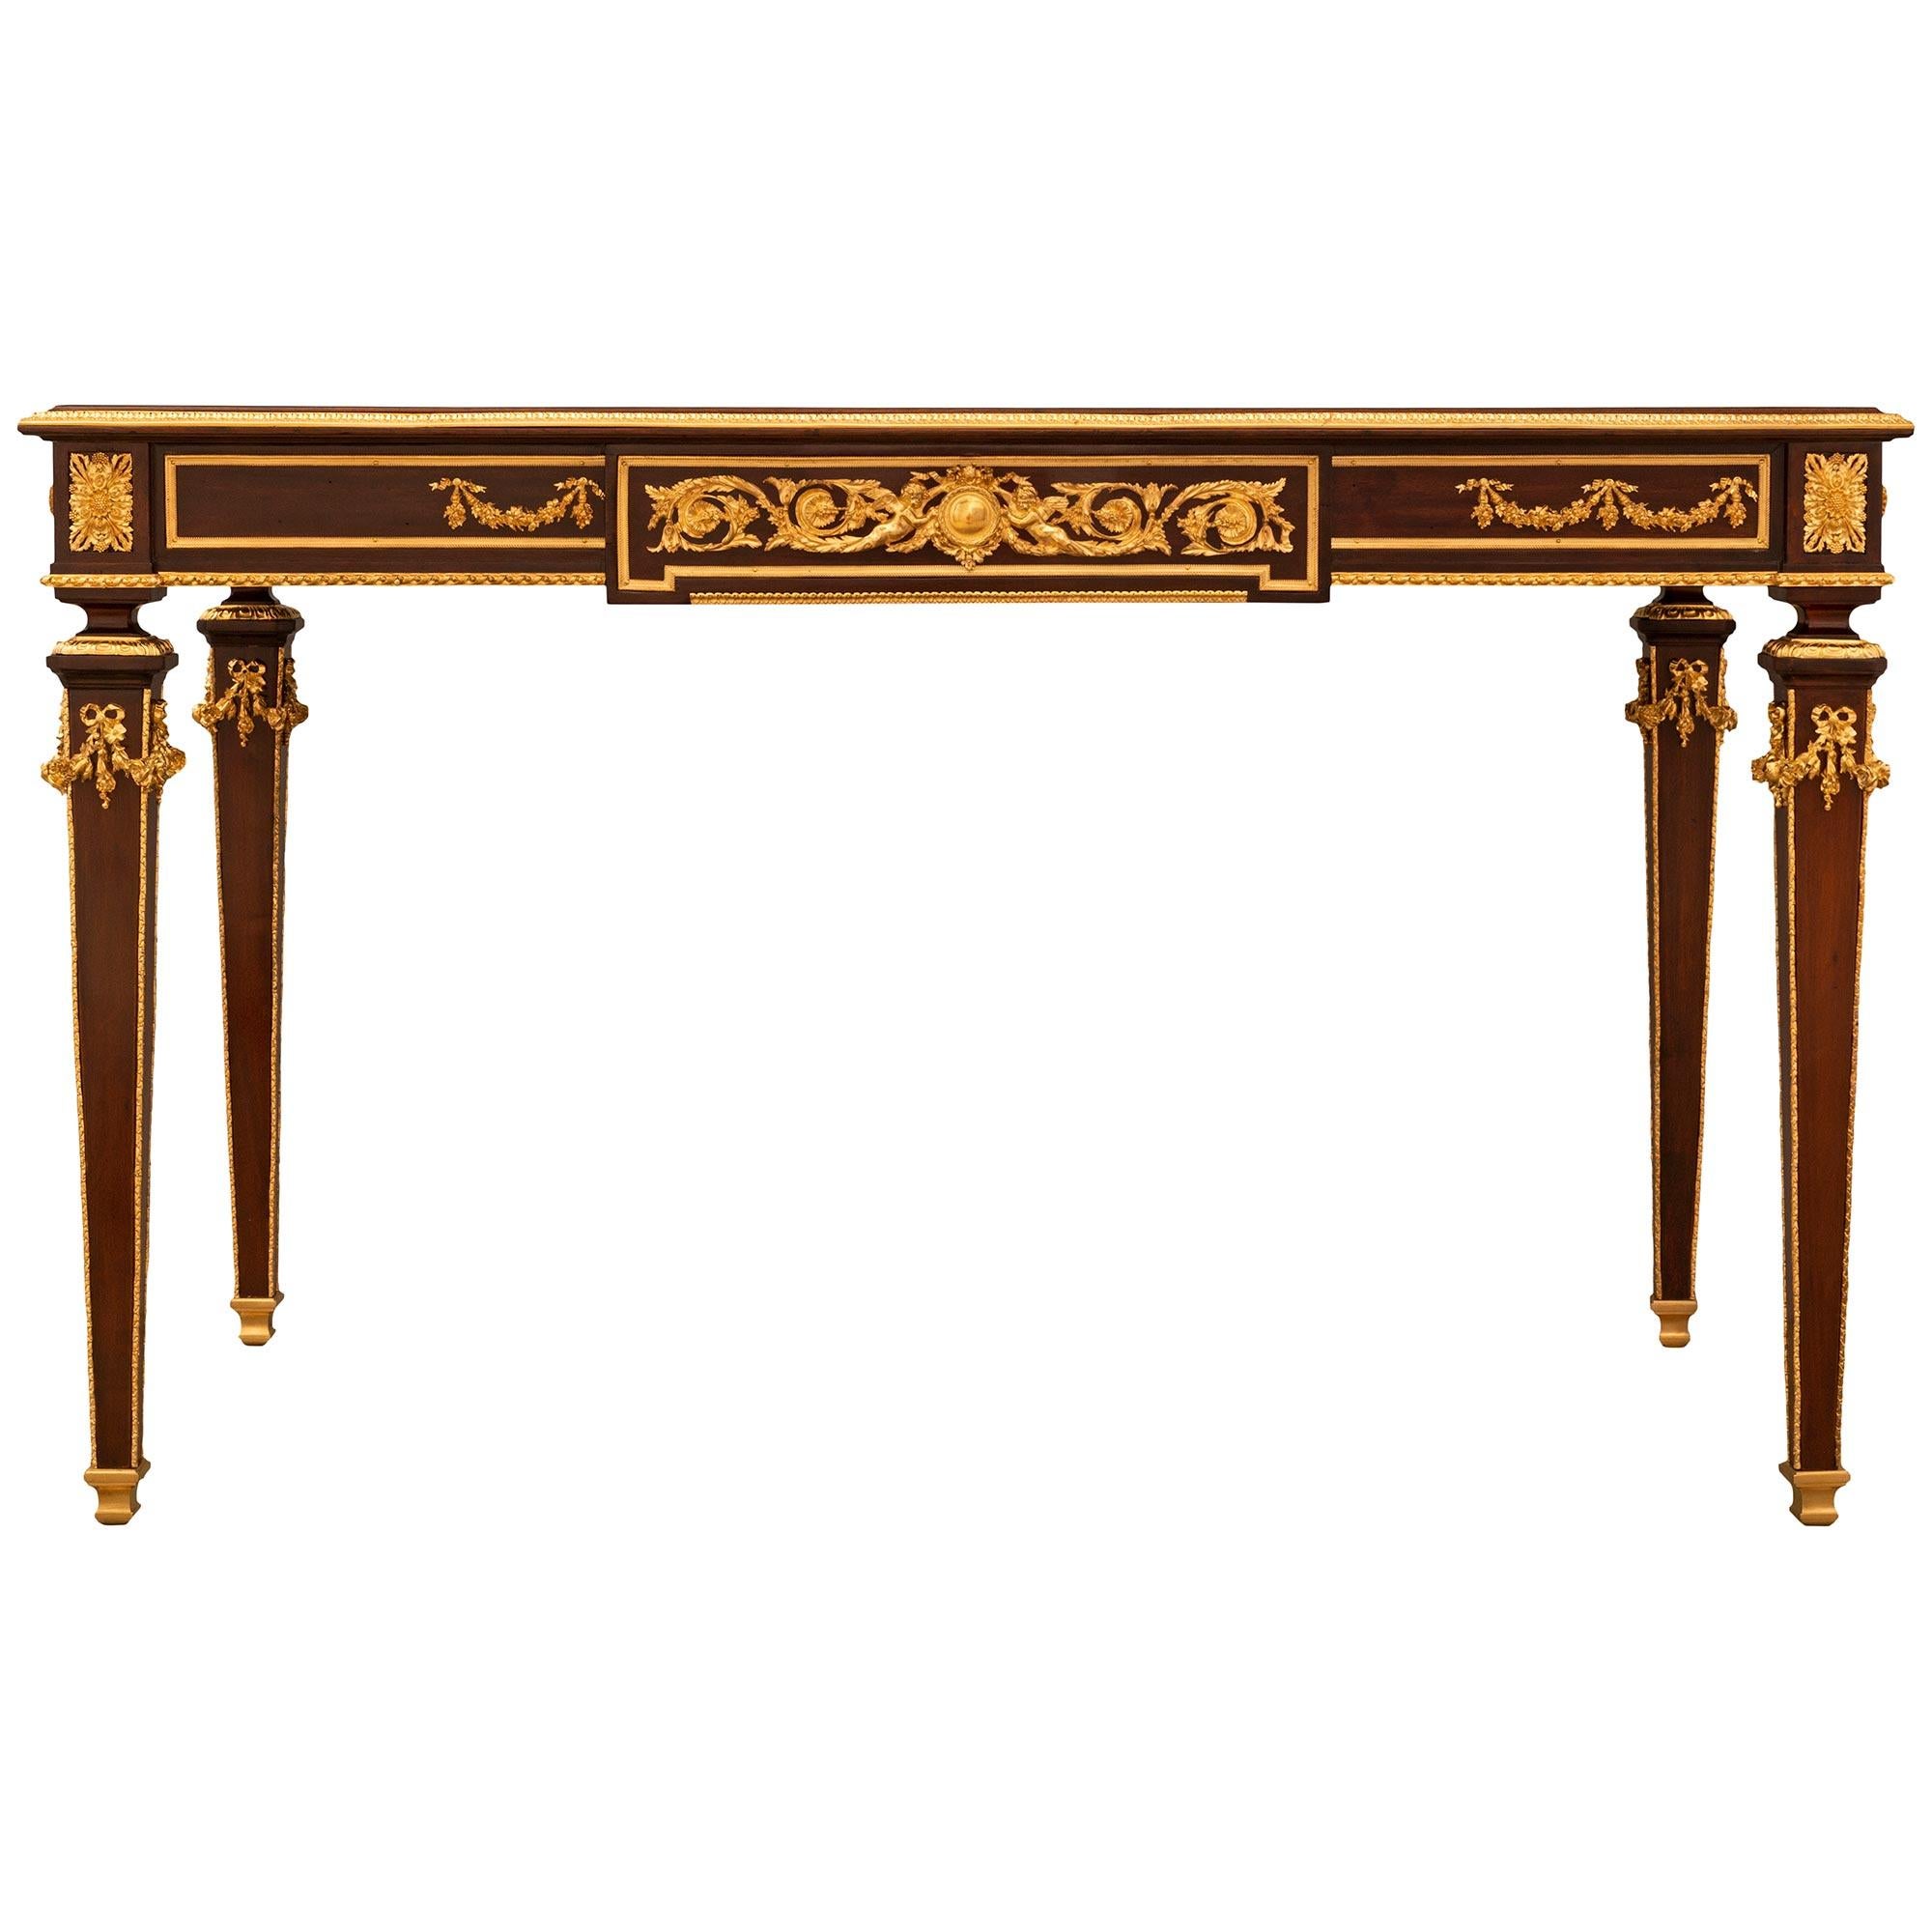 French 19th Century Belle Époque Period Mahogany, Brass and Ormolu Desk For Sale 6